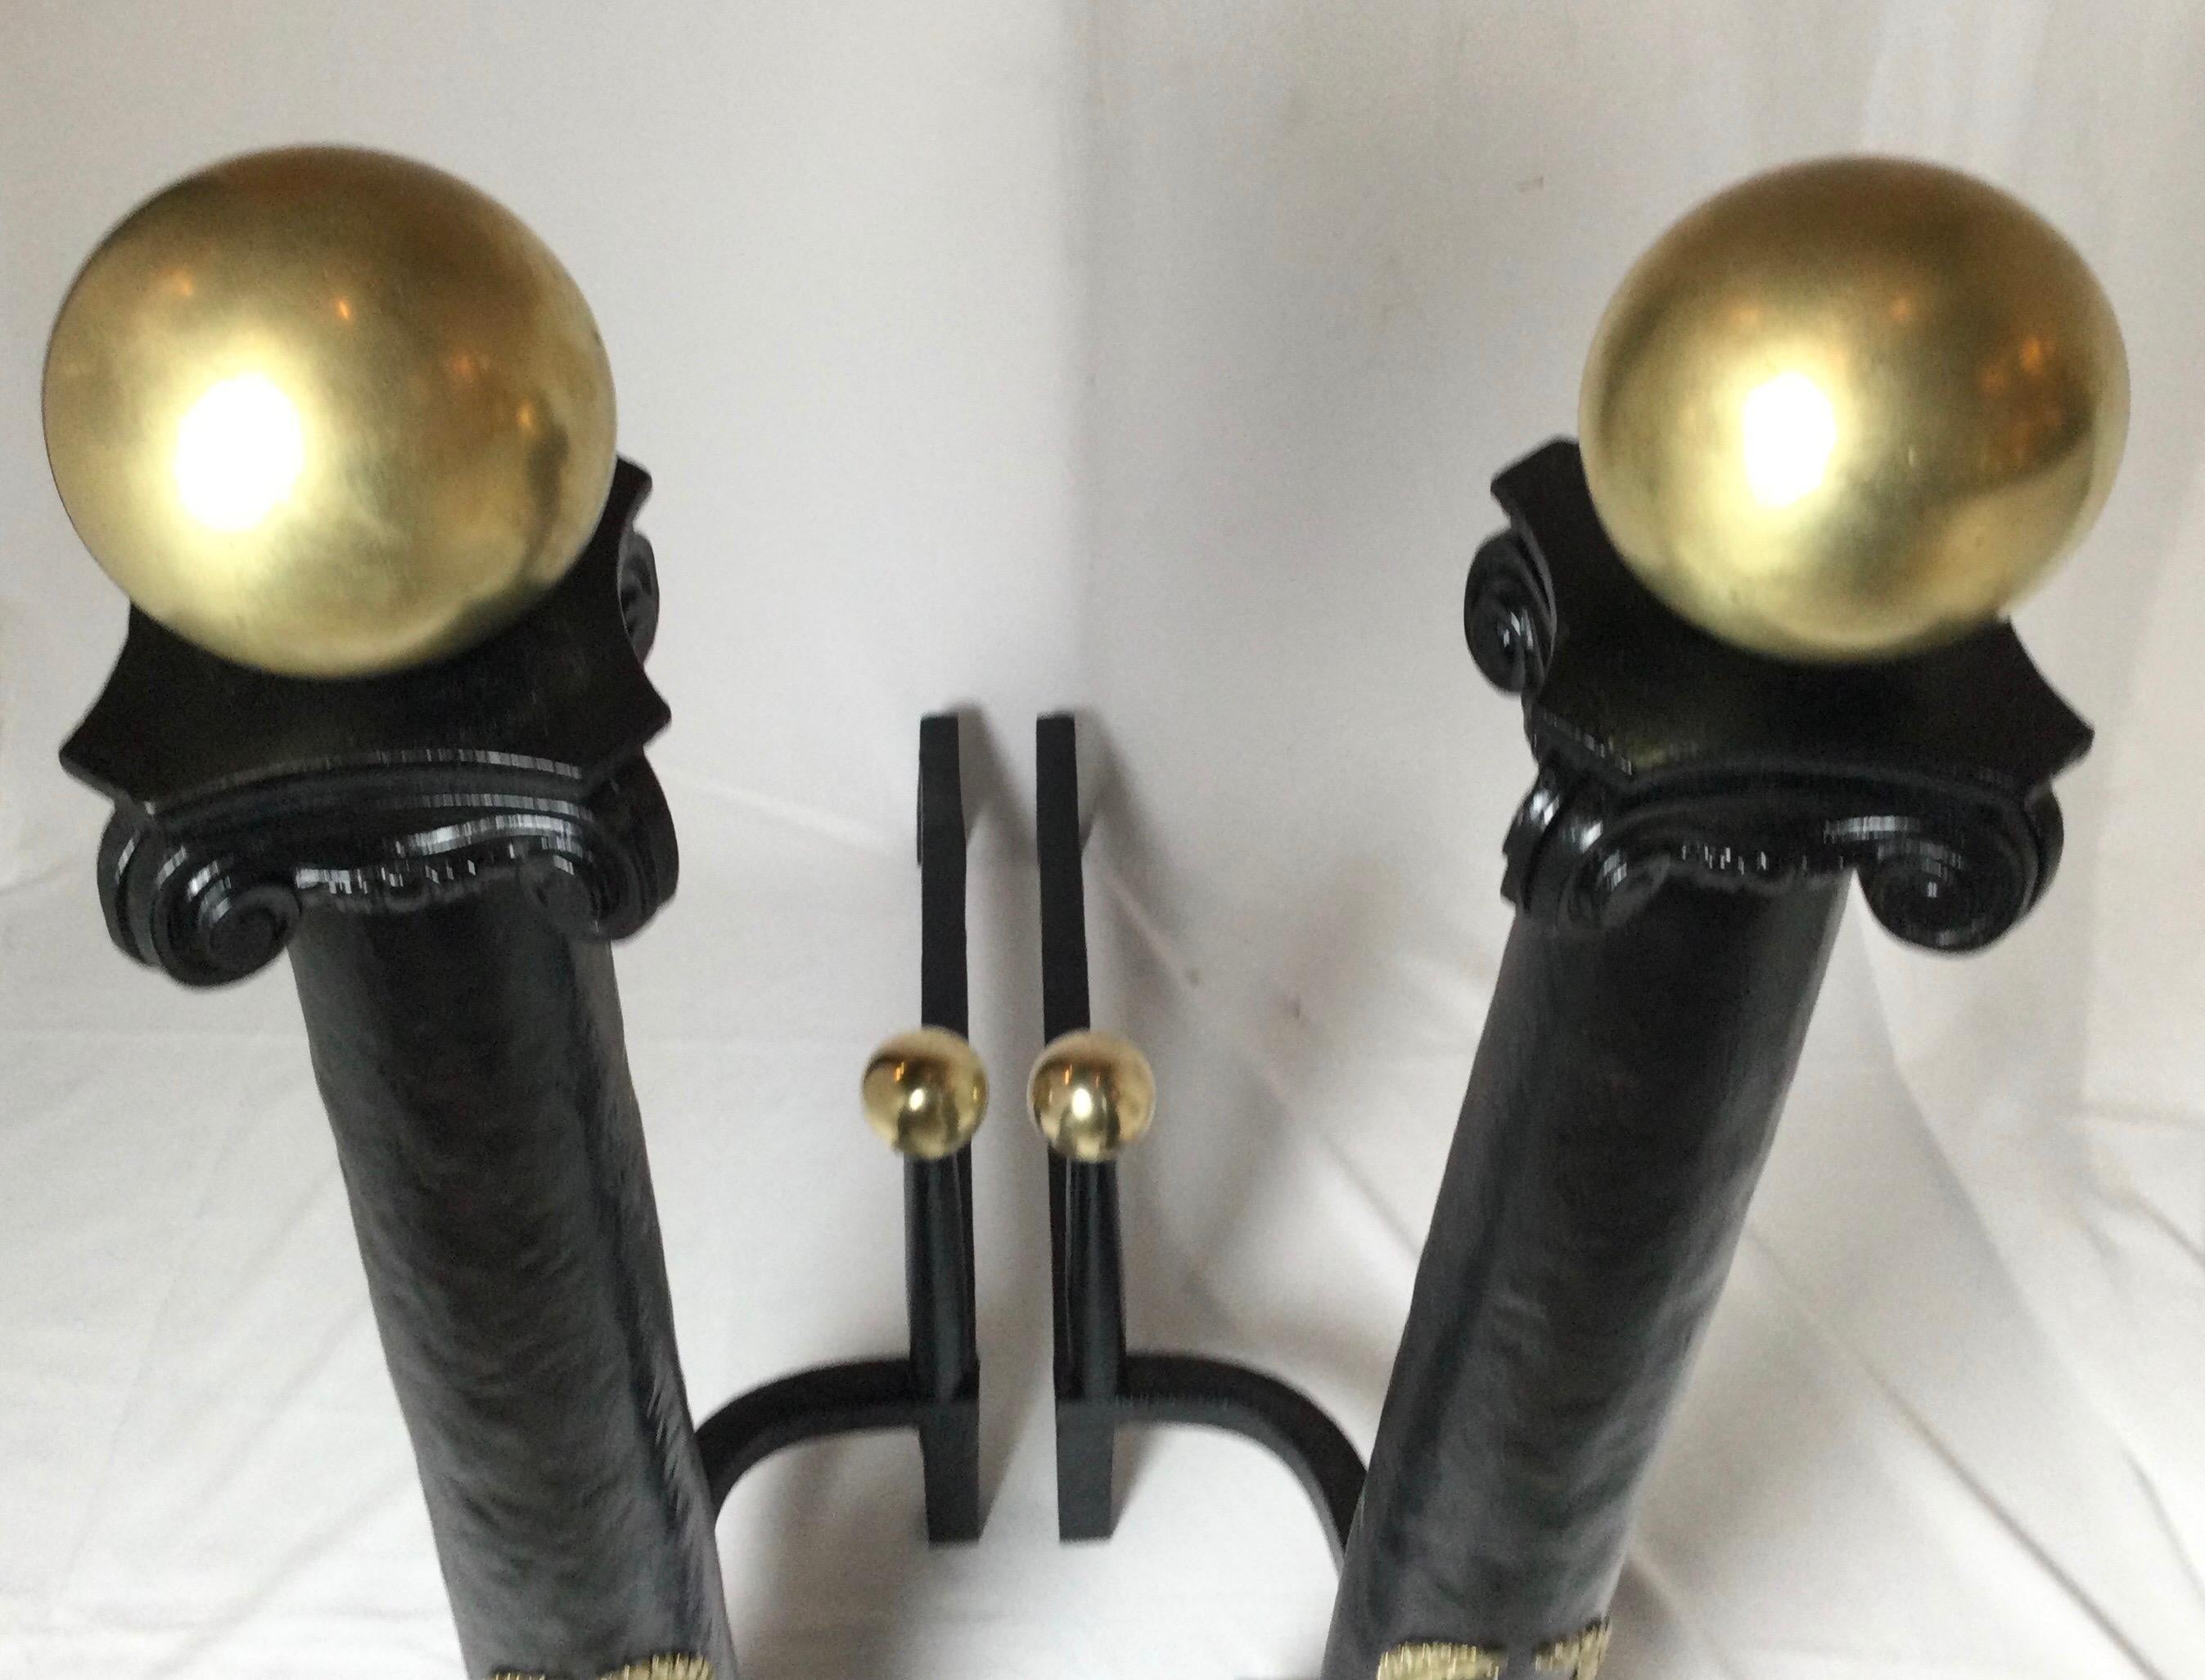 20th Century Circa 1900 Monumental Column Andirons With Large Brass Ball And Wreath Mounts